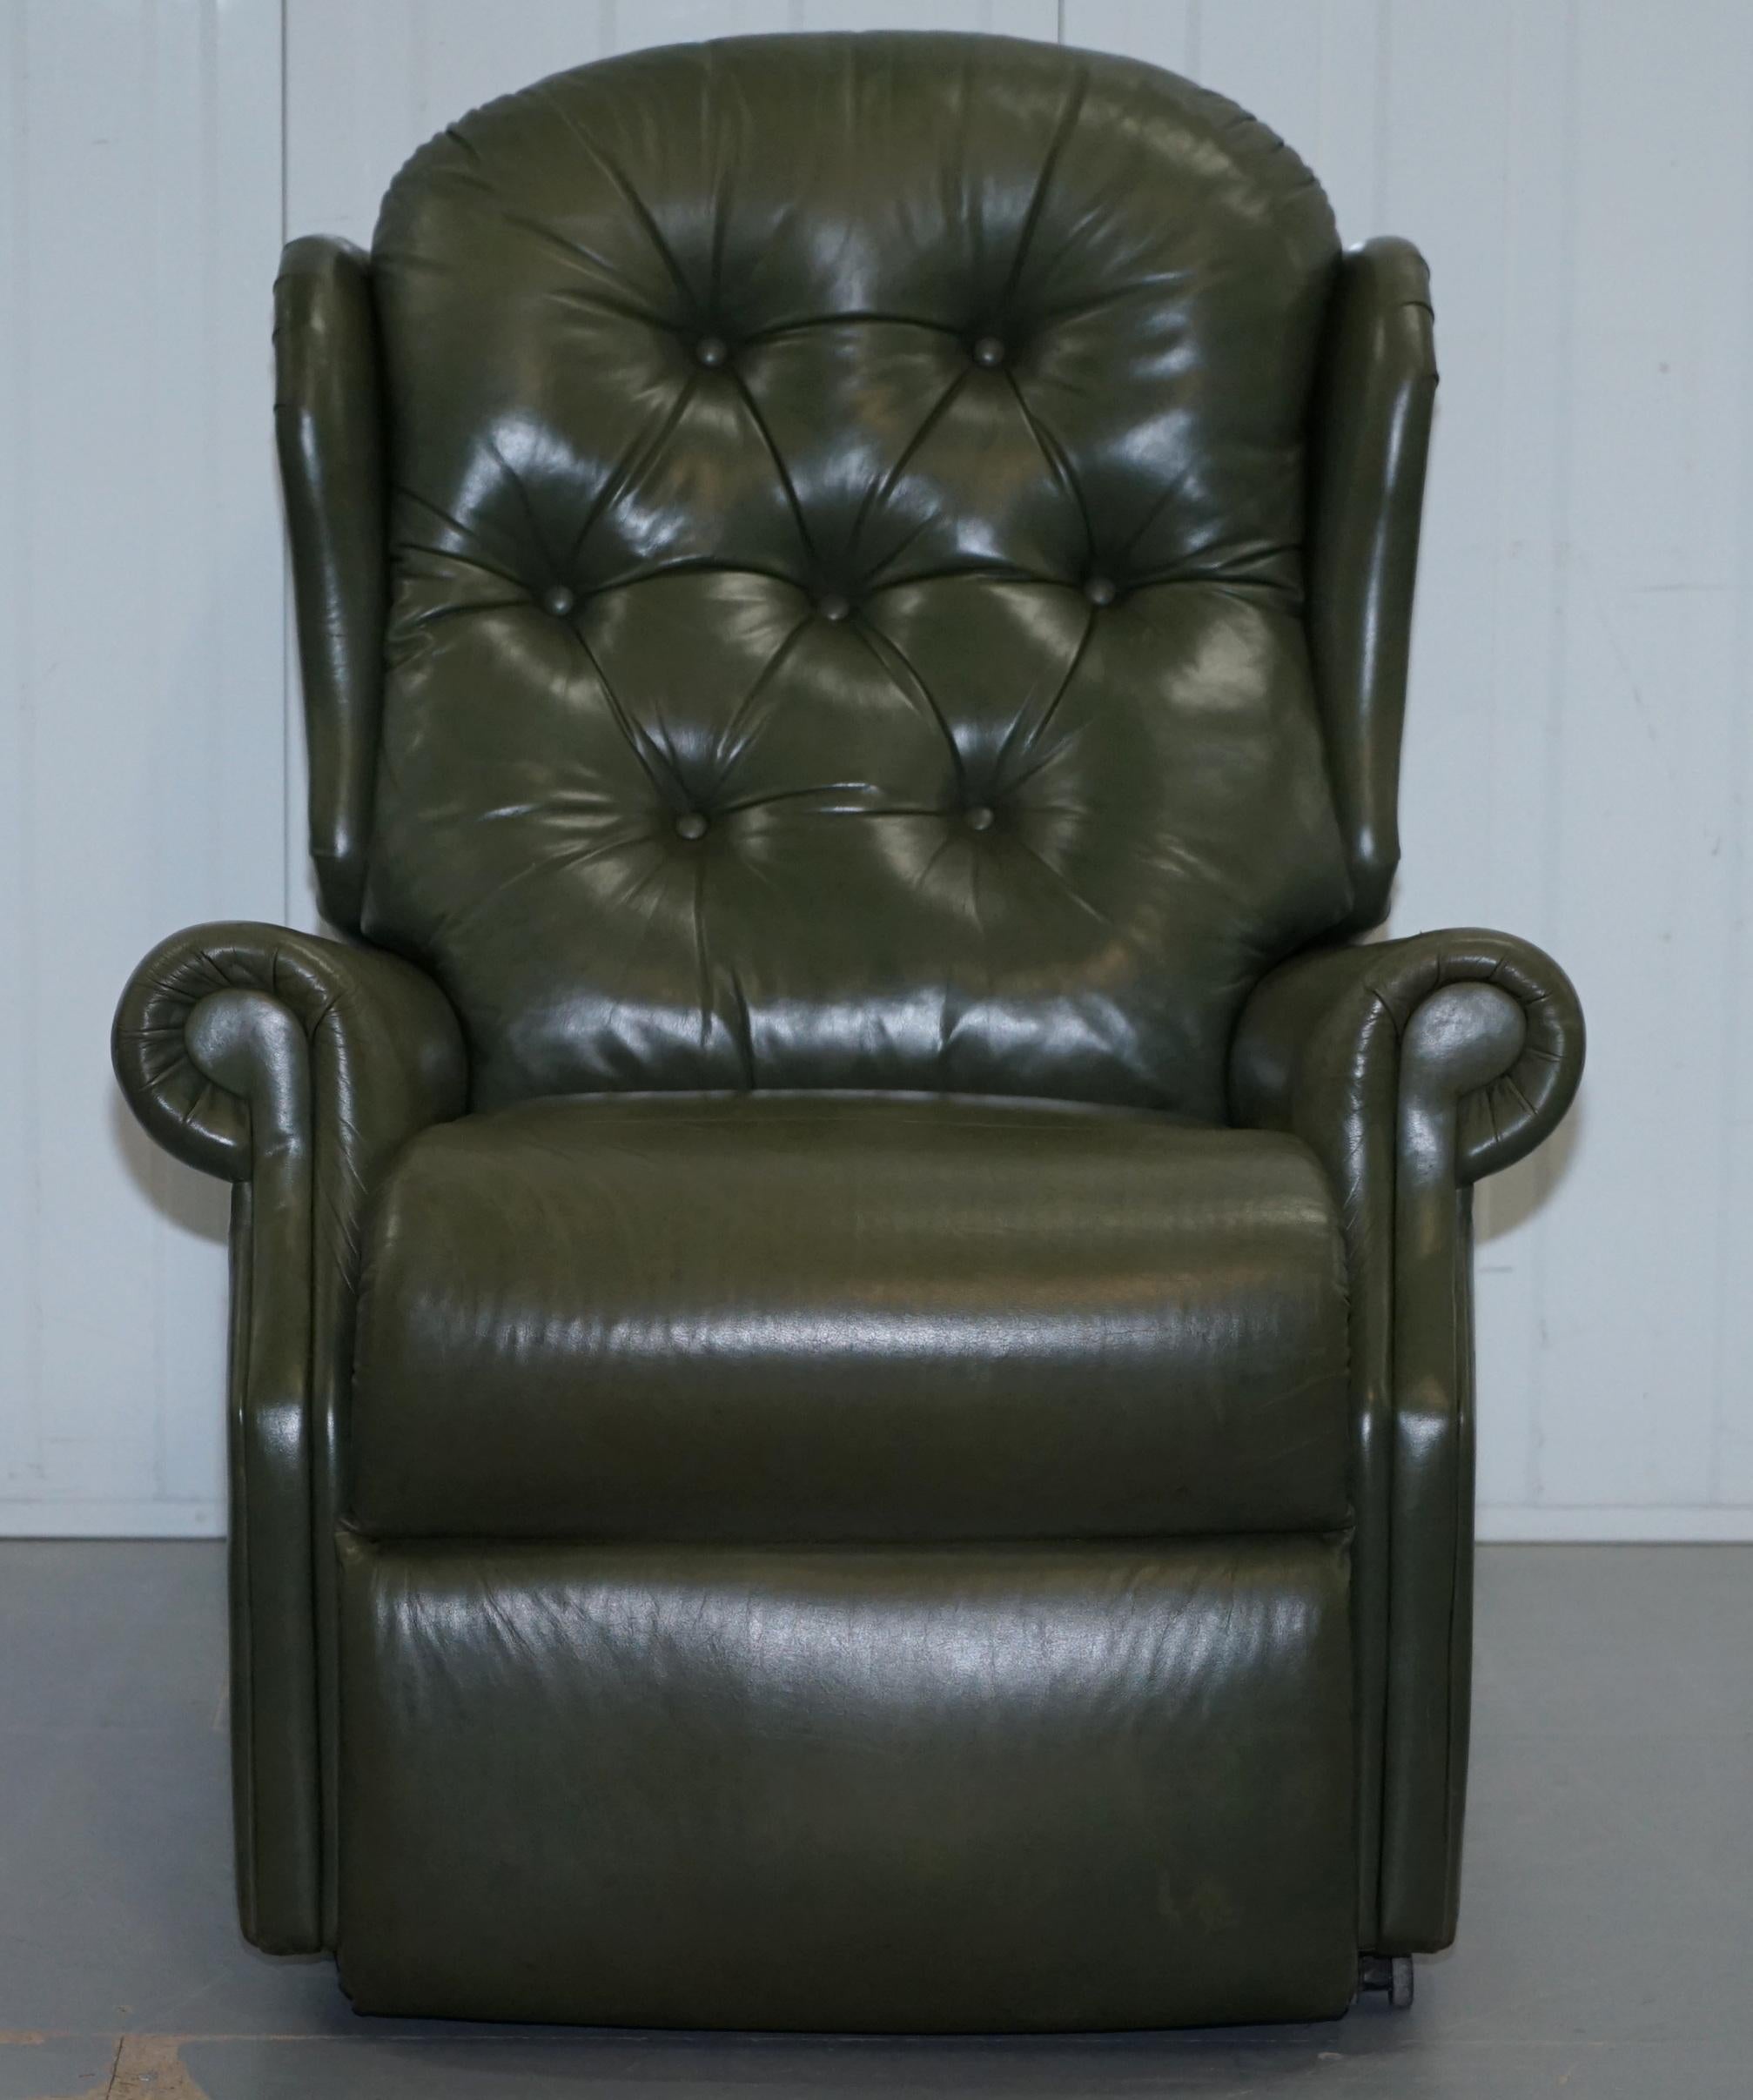 green leather recliner chair